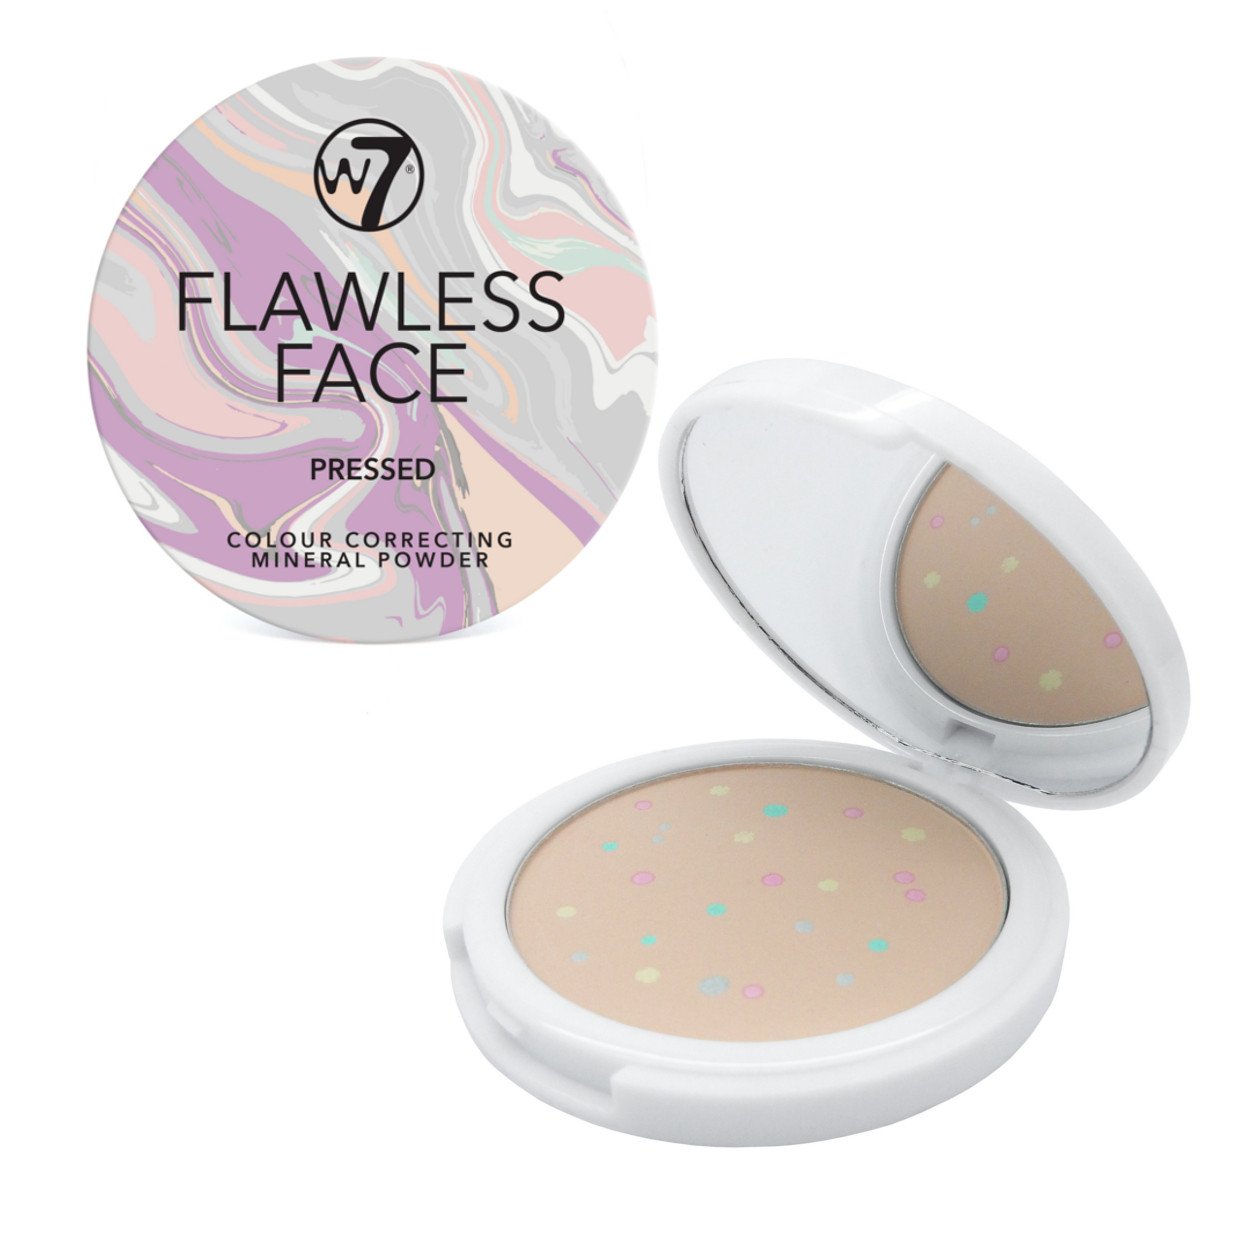 W7 Flawless Face Colour Correcting